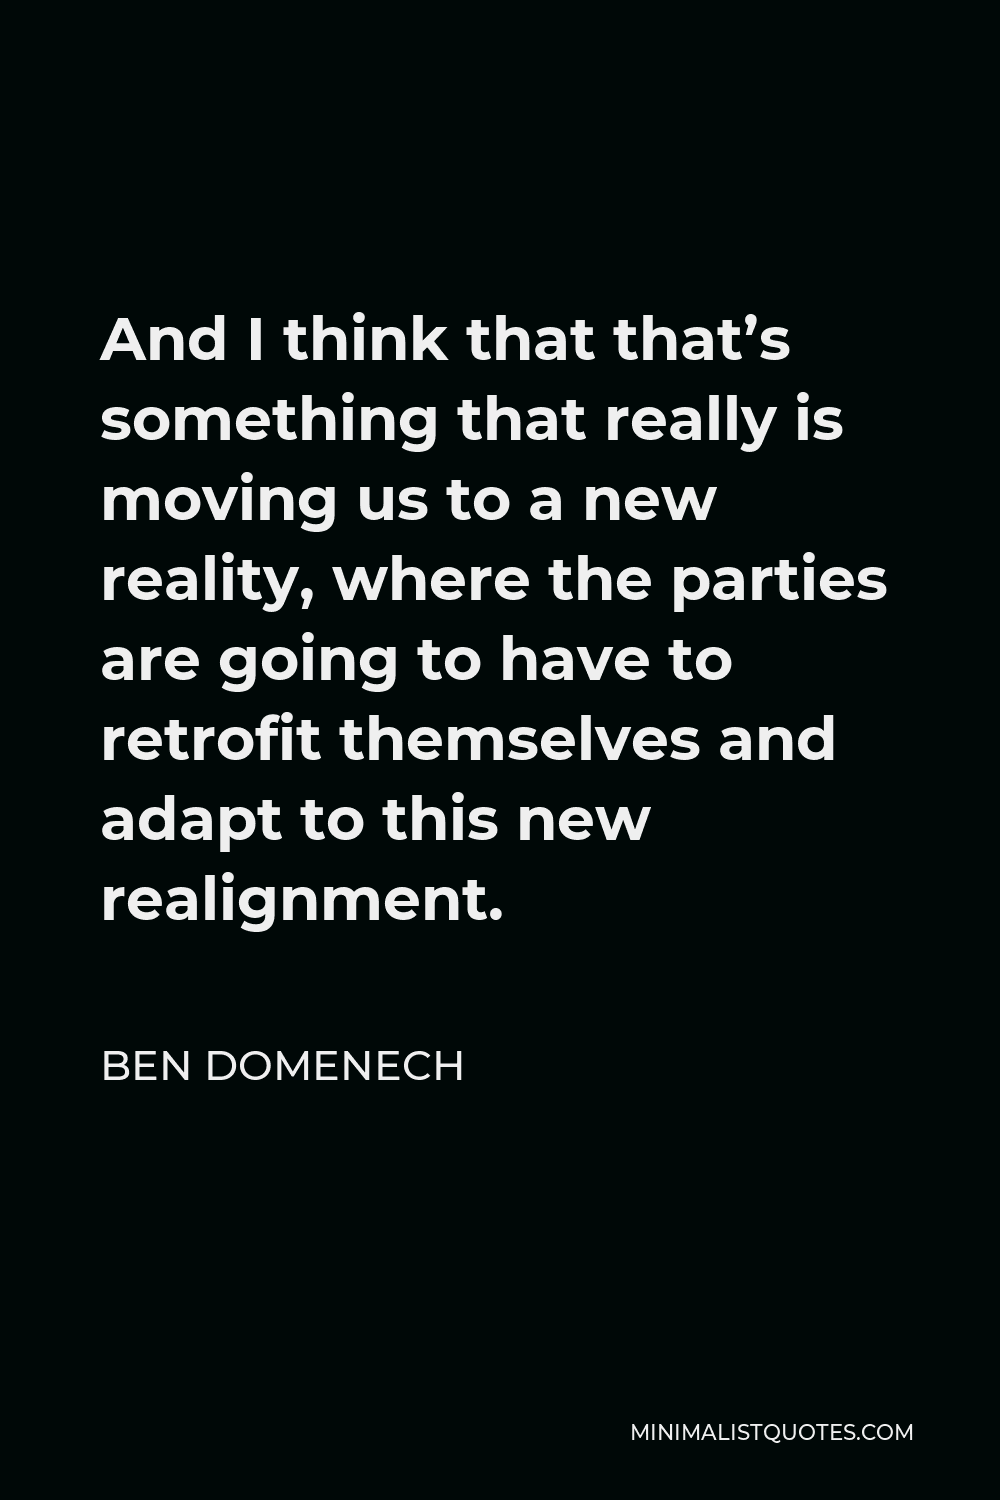 Ben Domenech Quote - And I think that that’s something that really is moving us to a new reality, where the parties are going to have to retrofit themselves and adapt to this new realignment.